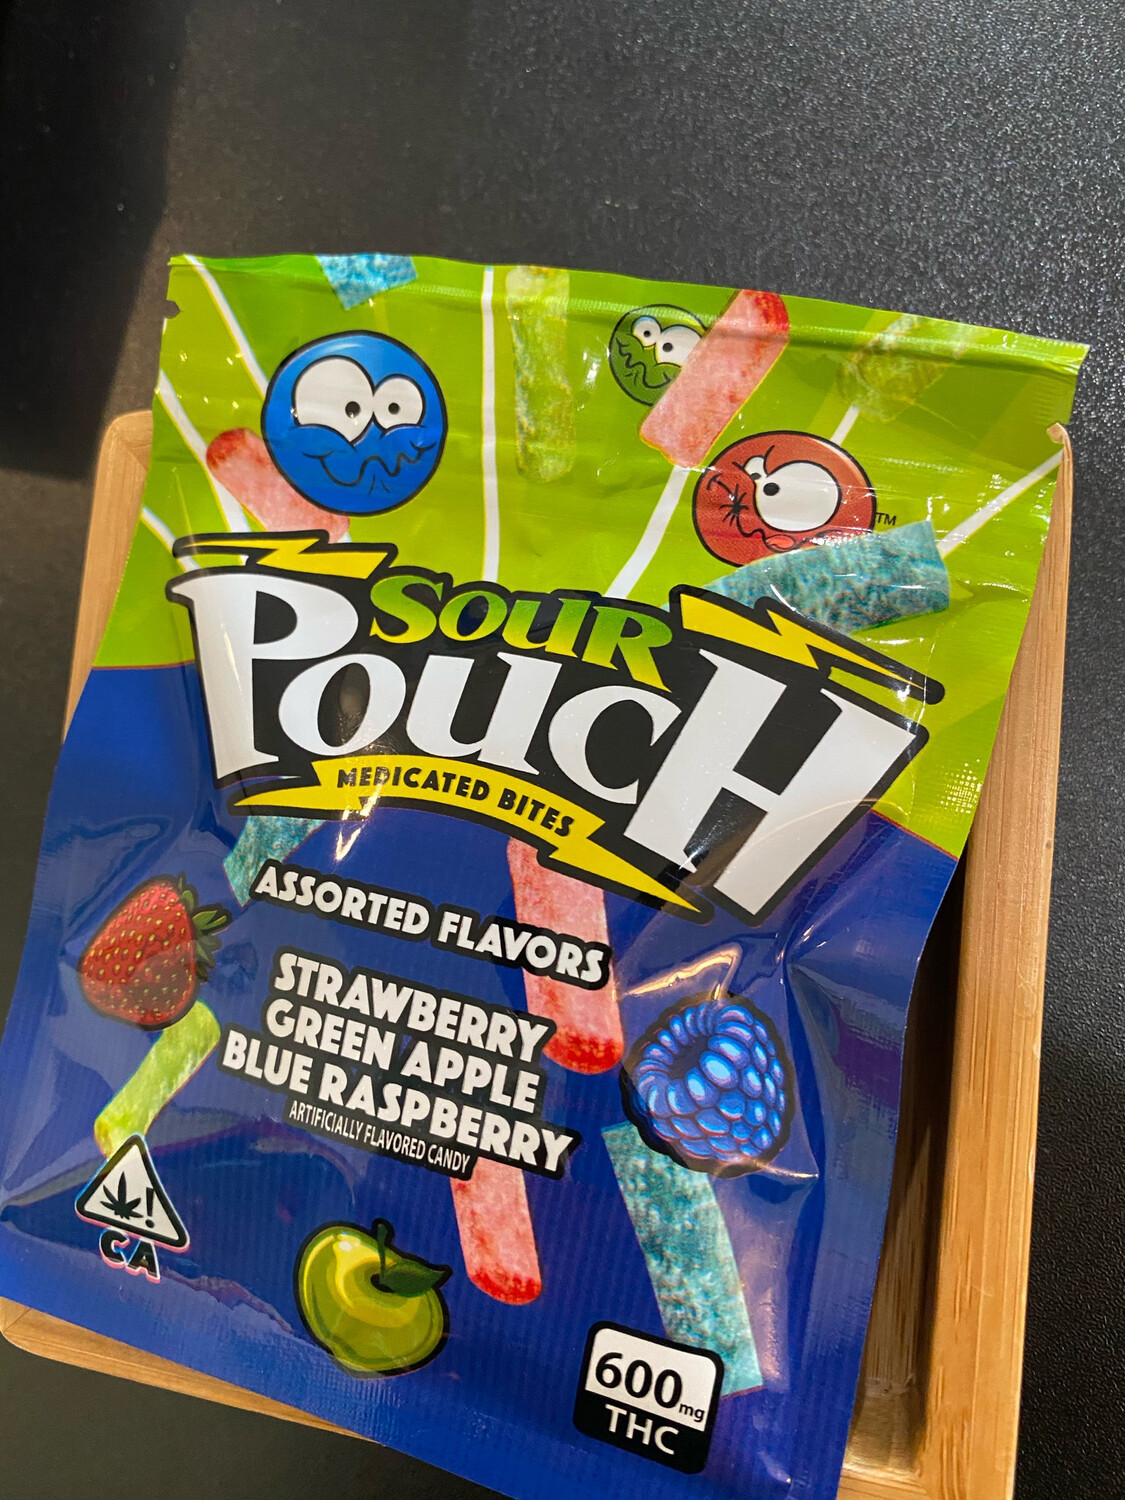 Sour Pouch Medicated Bites